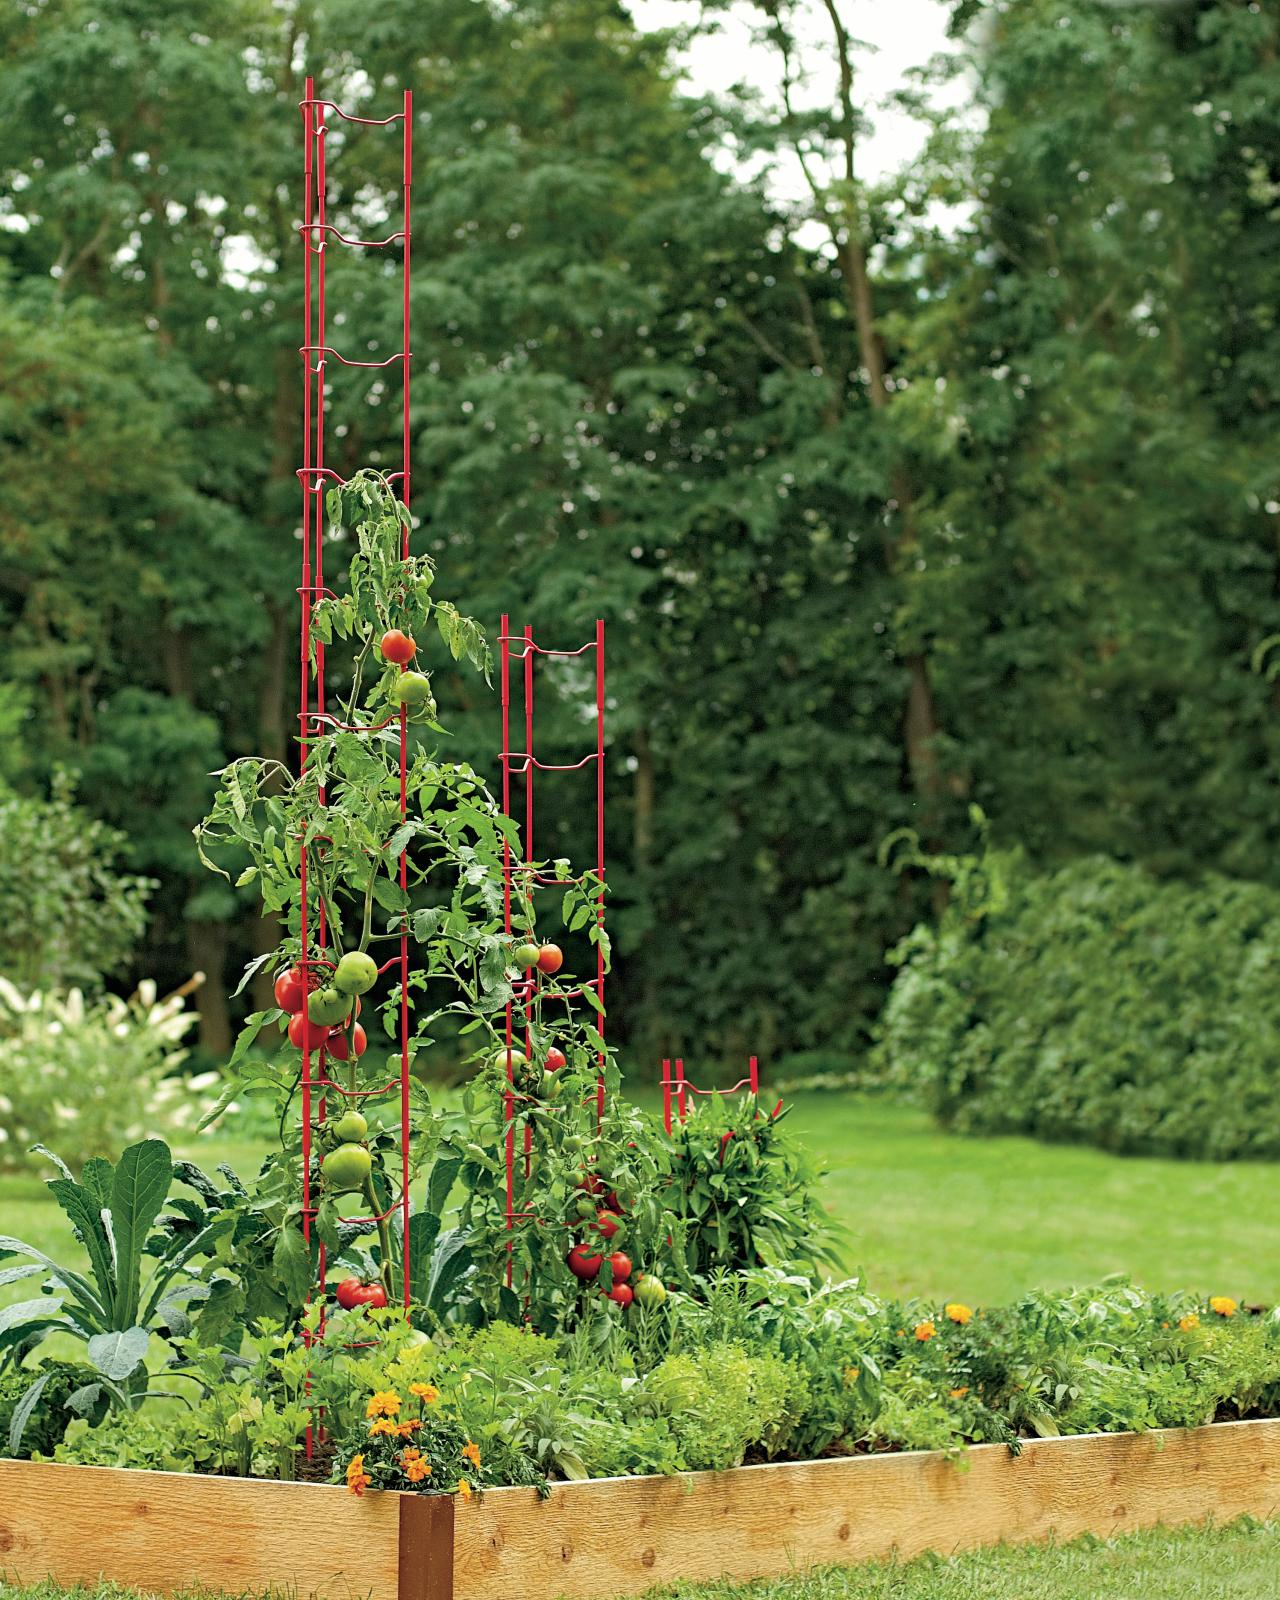 How To Grow Tomatoes In A Raised Bed, How To Grow Tomatoes In A Raised Bed Garden